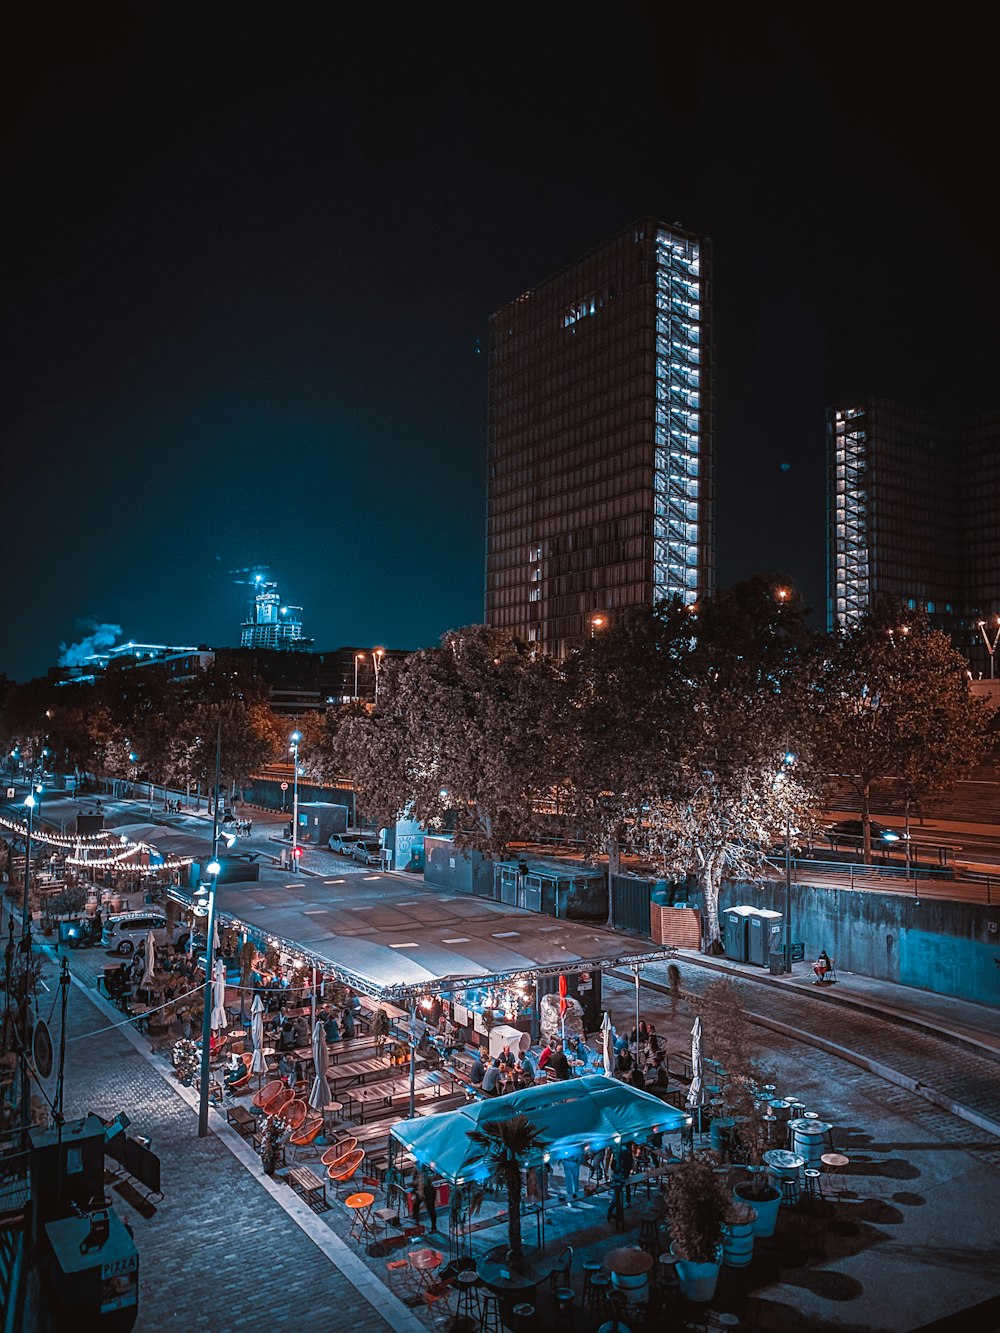 city buildings during night time